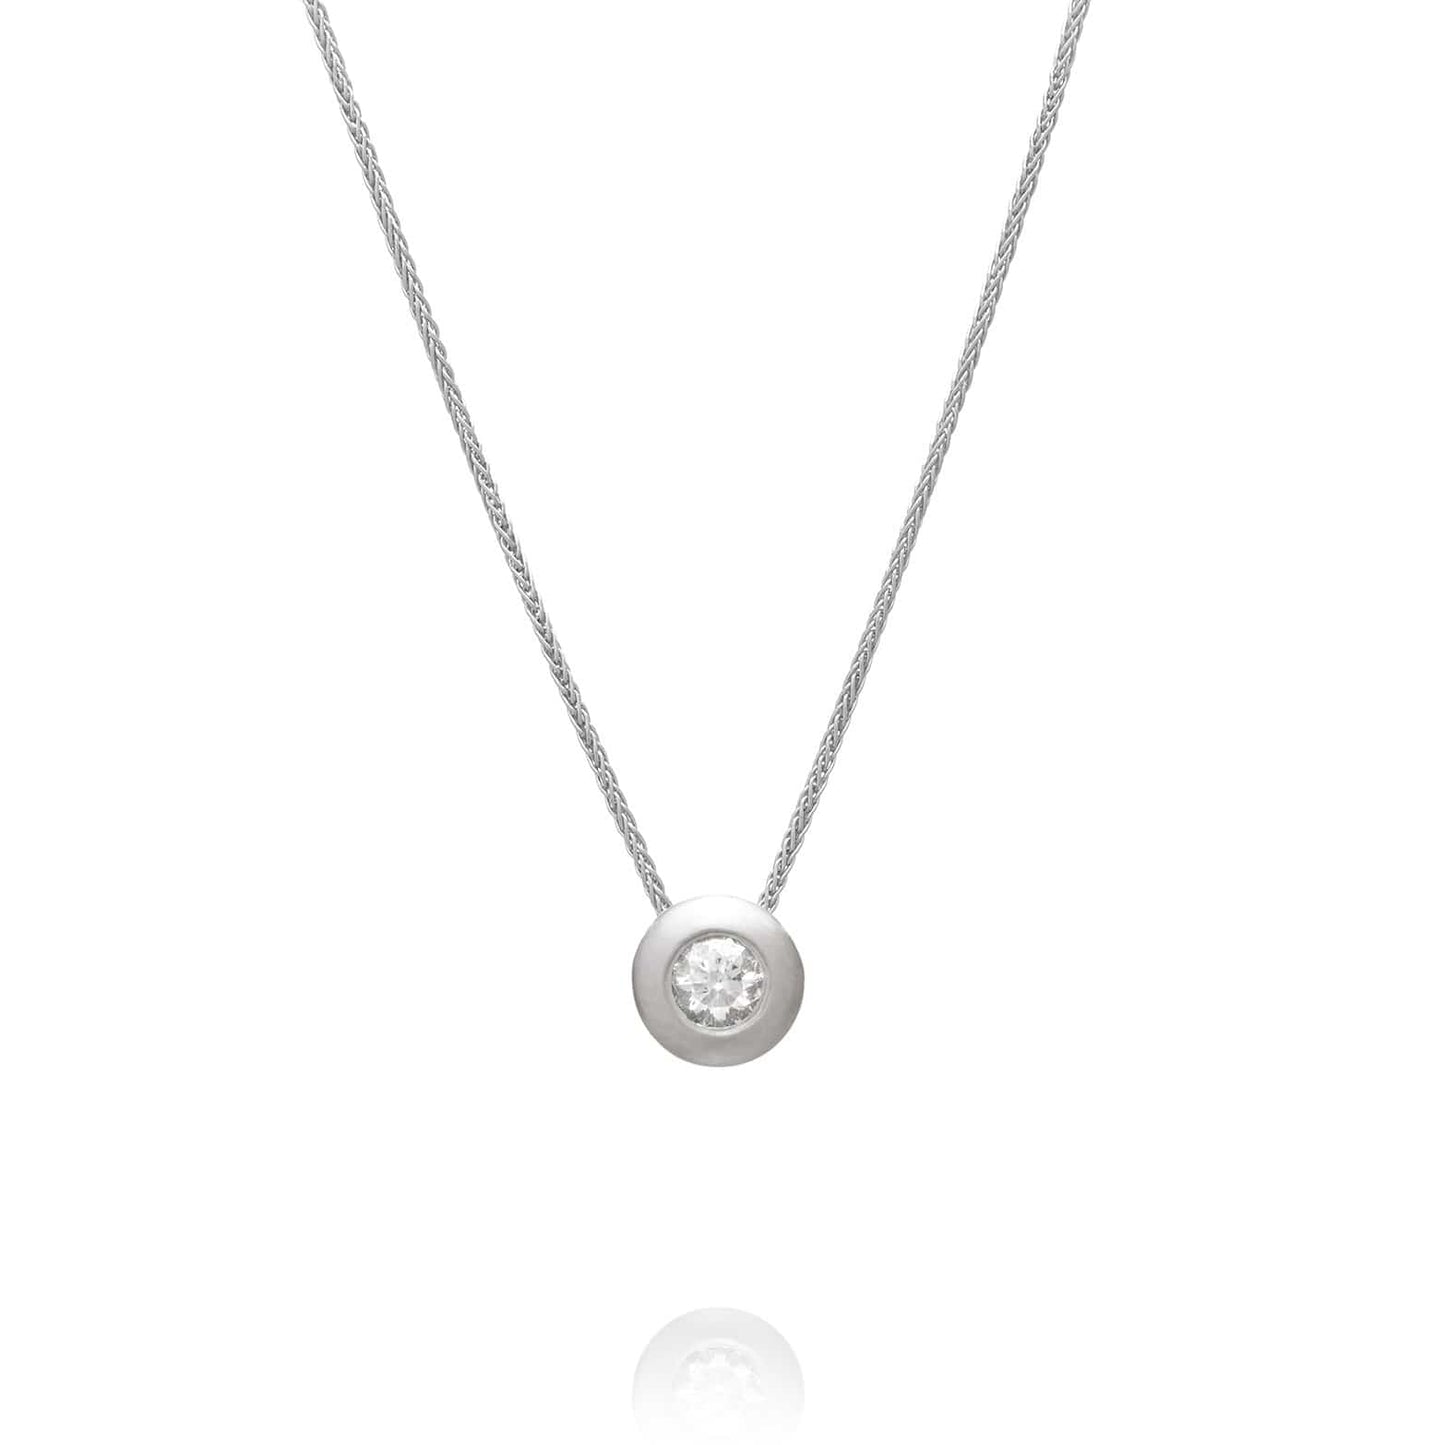 Dalia T Online Necklace Delicate Collection 14KT WG Small Diamond Pendnat Necklace 0.10CT